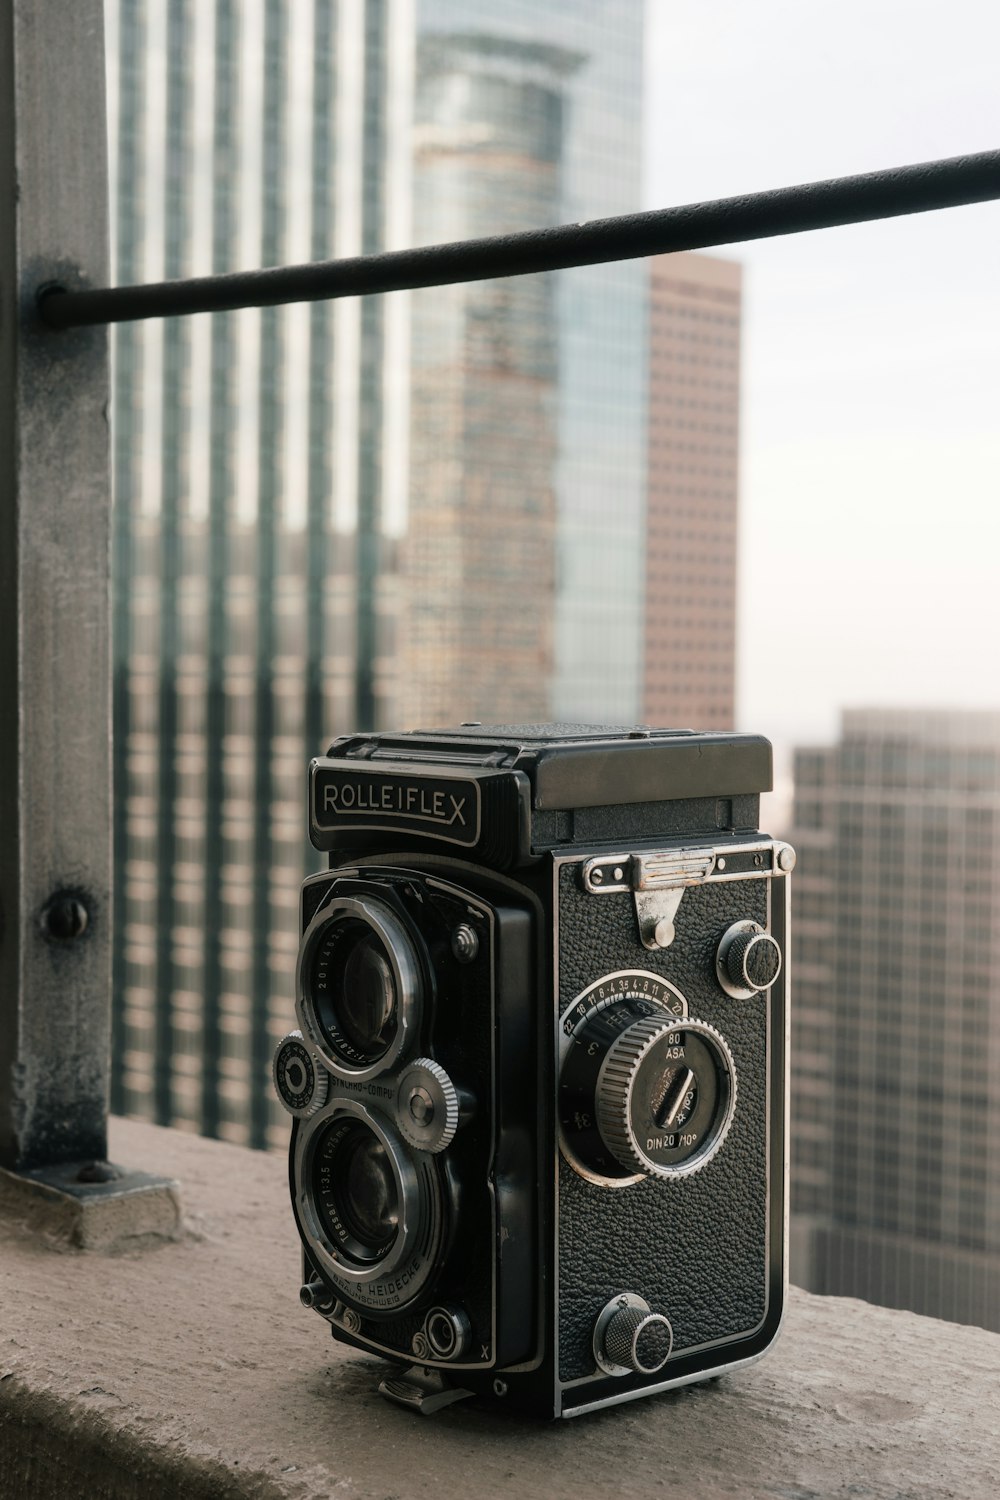 500+ Hasselblad Pictures | Download Free Images on Unsplash